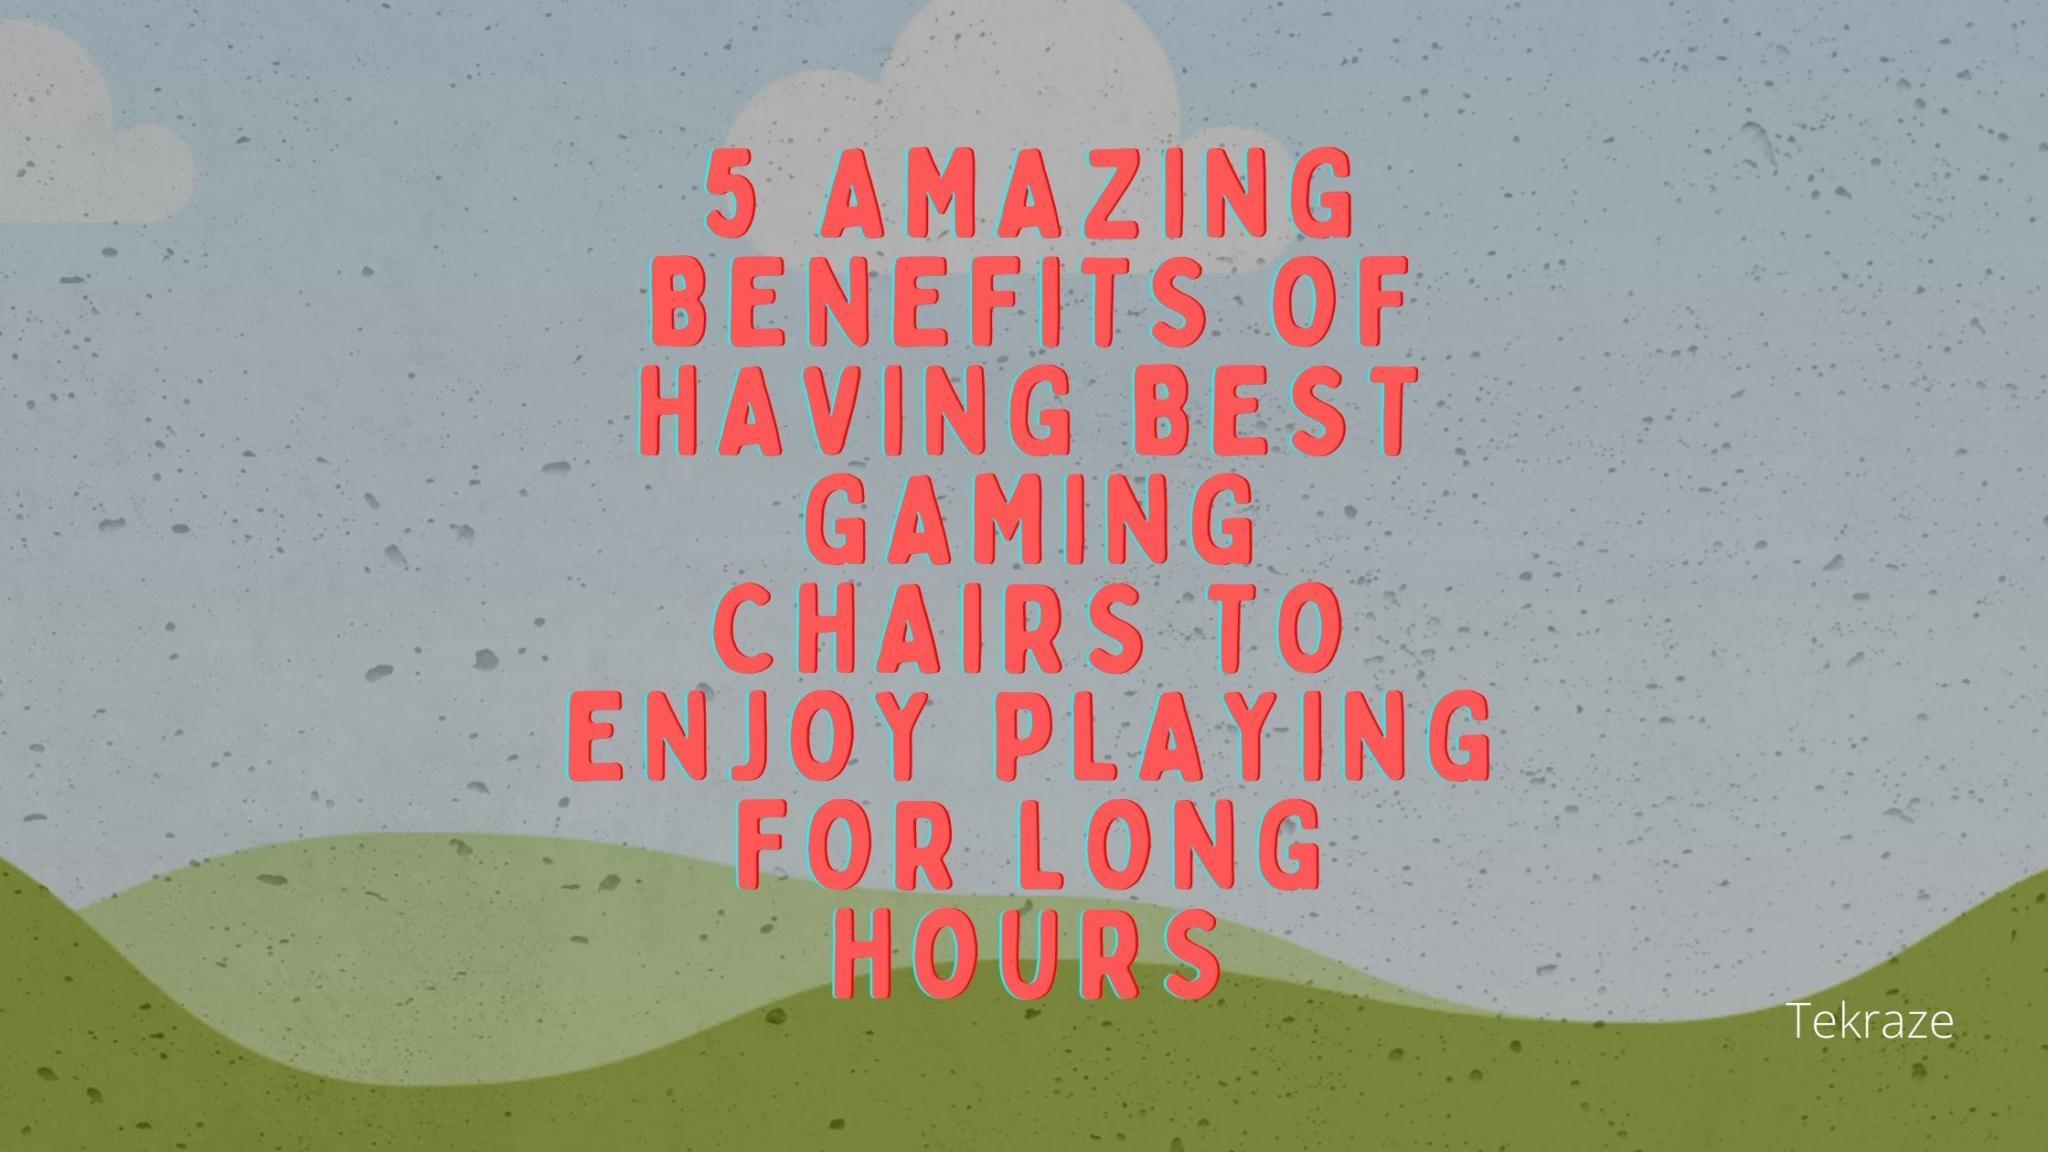 5 Amazing Benefits Of Having Best Gaming Chairs to Enjoy Playing For Long Hours Banner Image